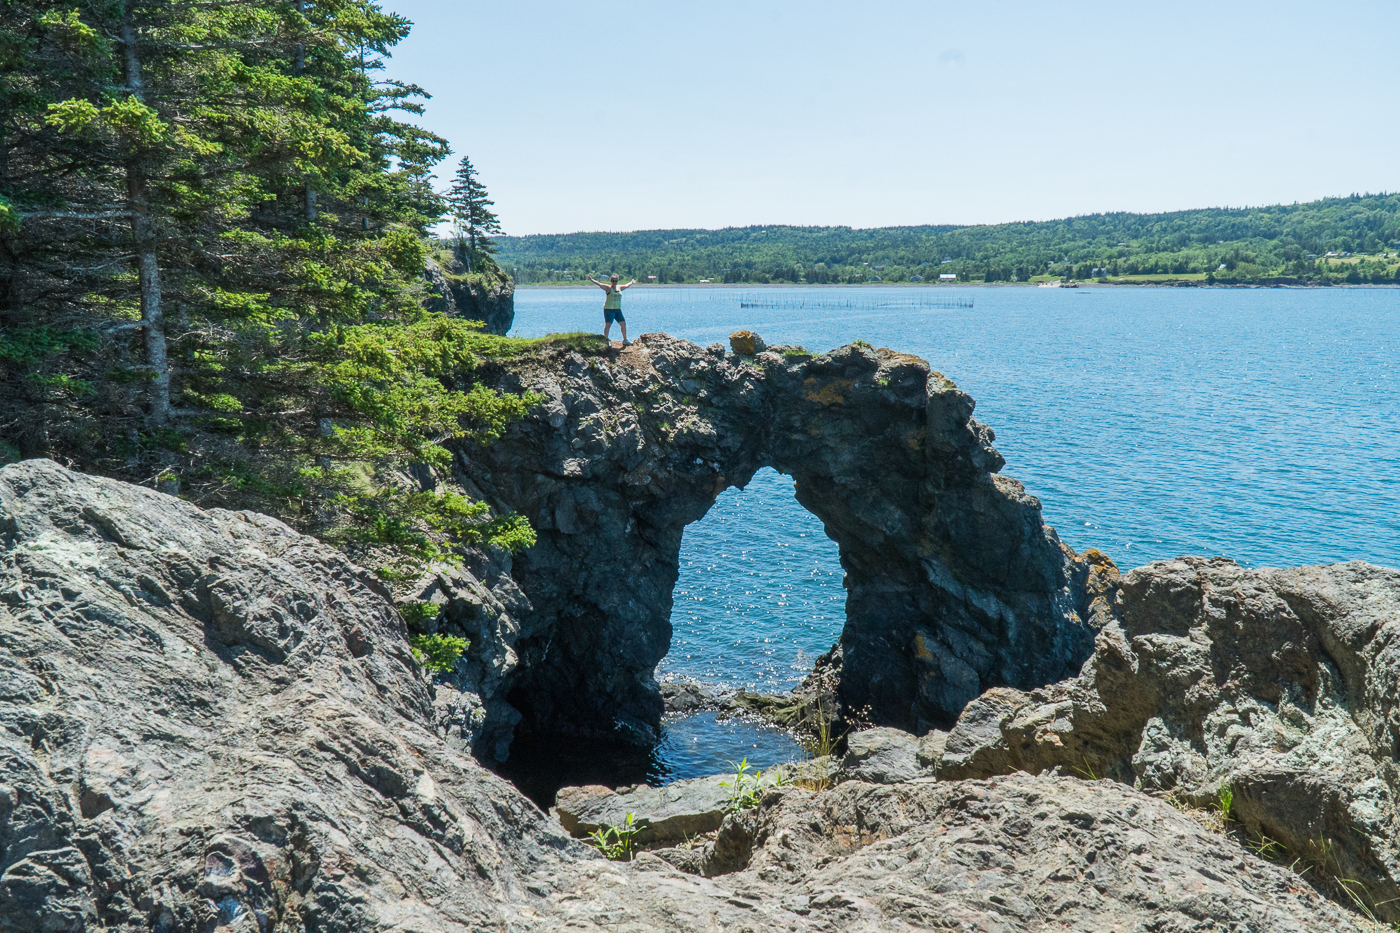 Maude sur le rocher Hole in the Wall - Grand Manan